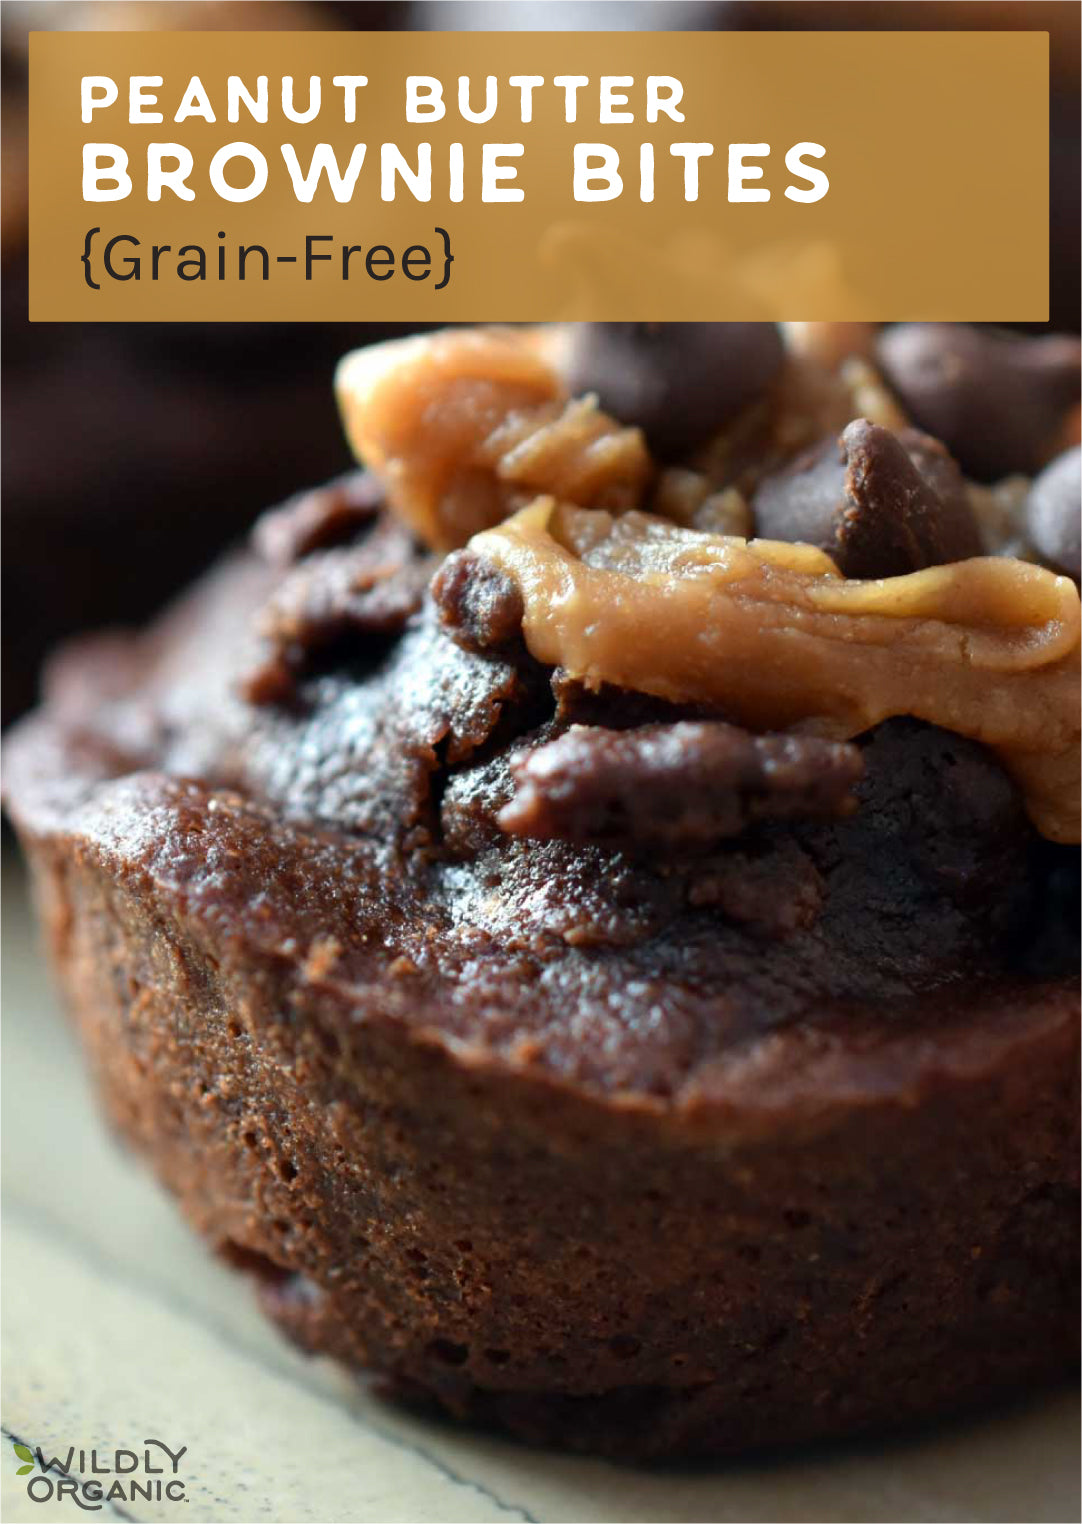 Grain-Free Peanut Butter Brownie Bites on a table